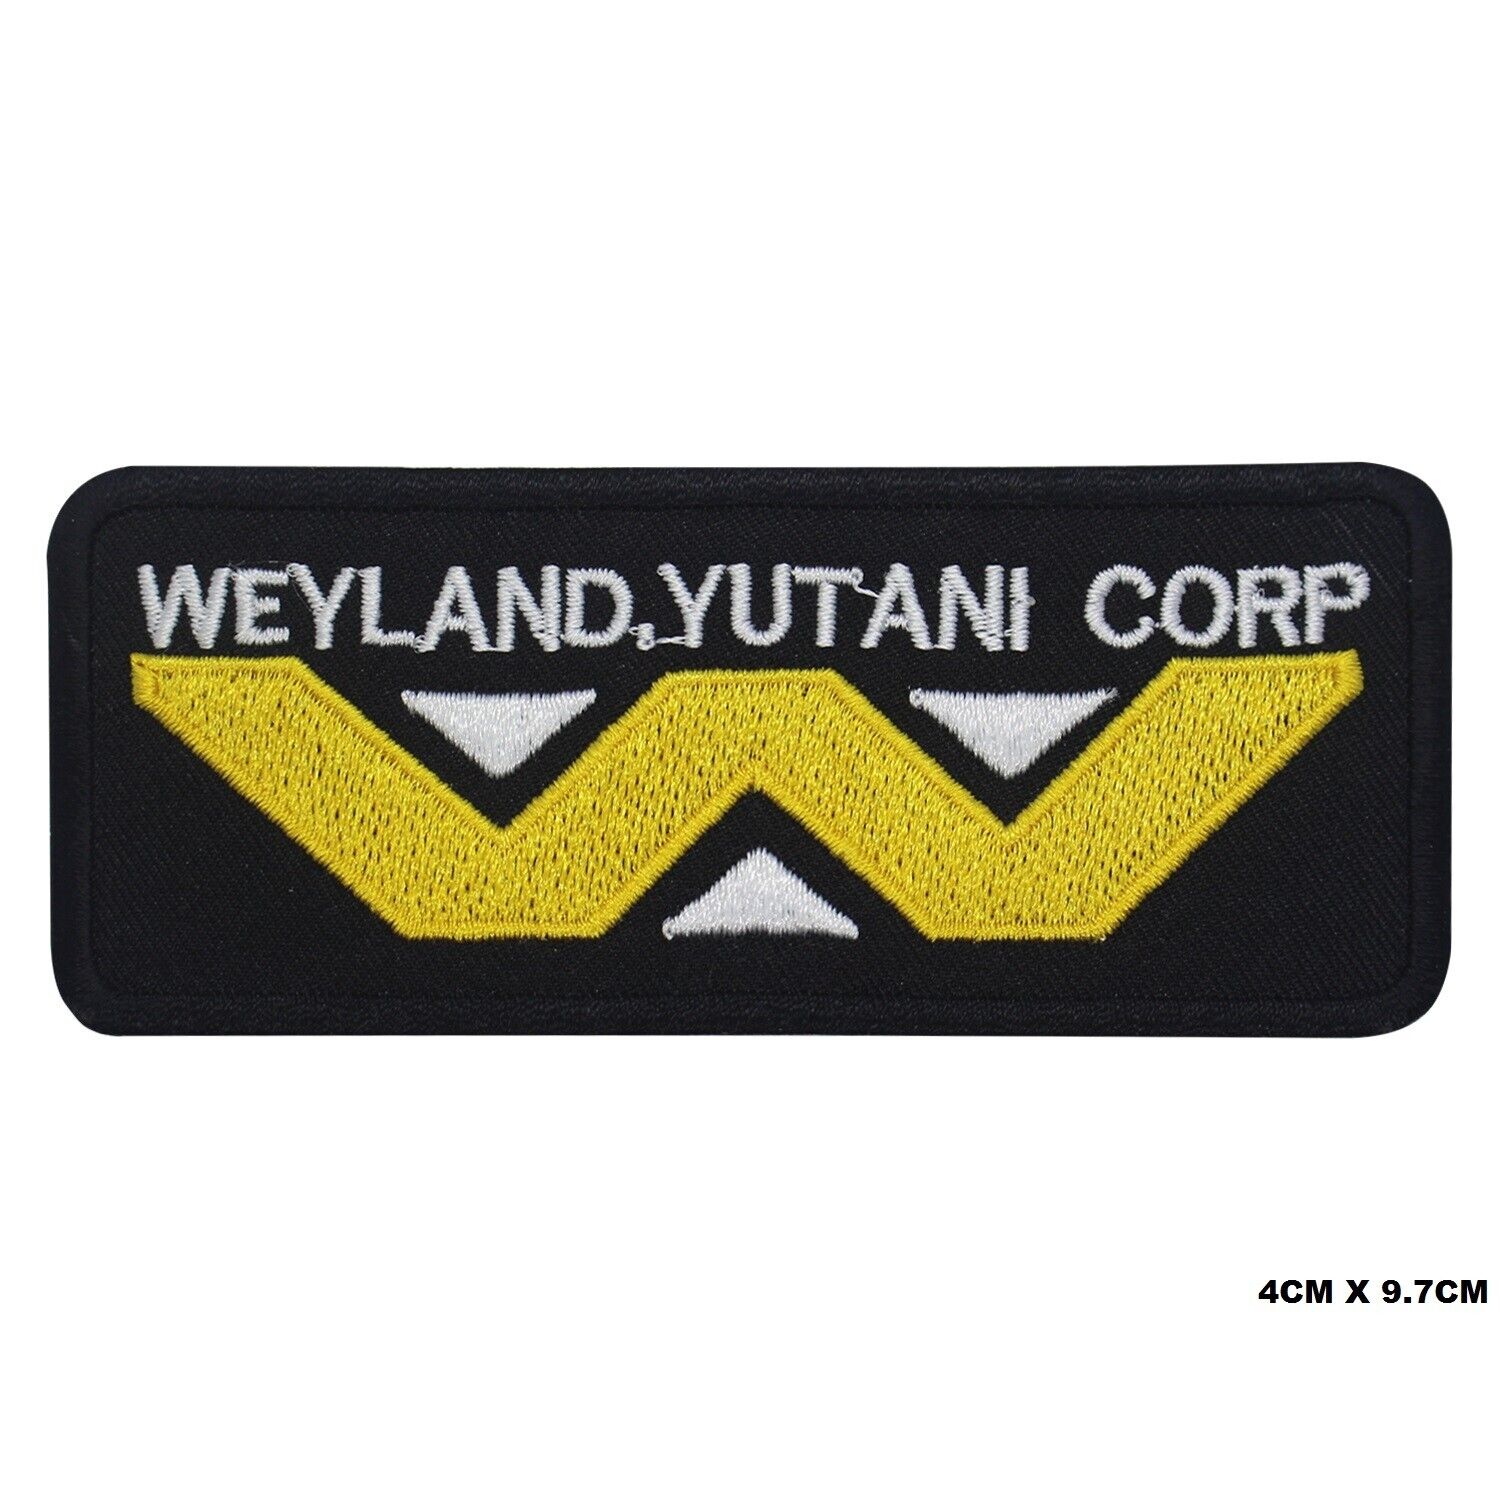 Weyland,Yutani Corp Embroidered Patch Iron On/Sew On Patch Batch For Clothes